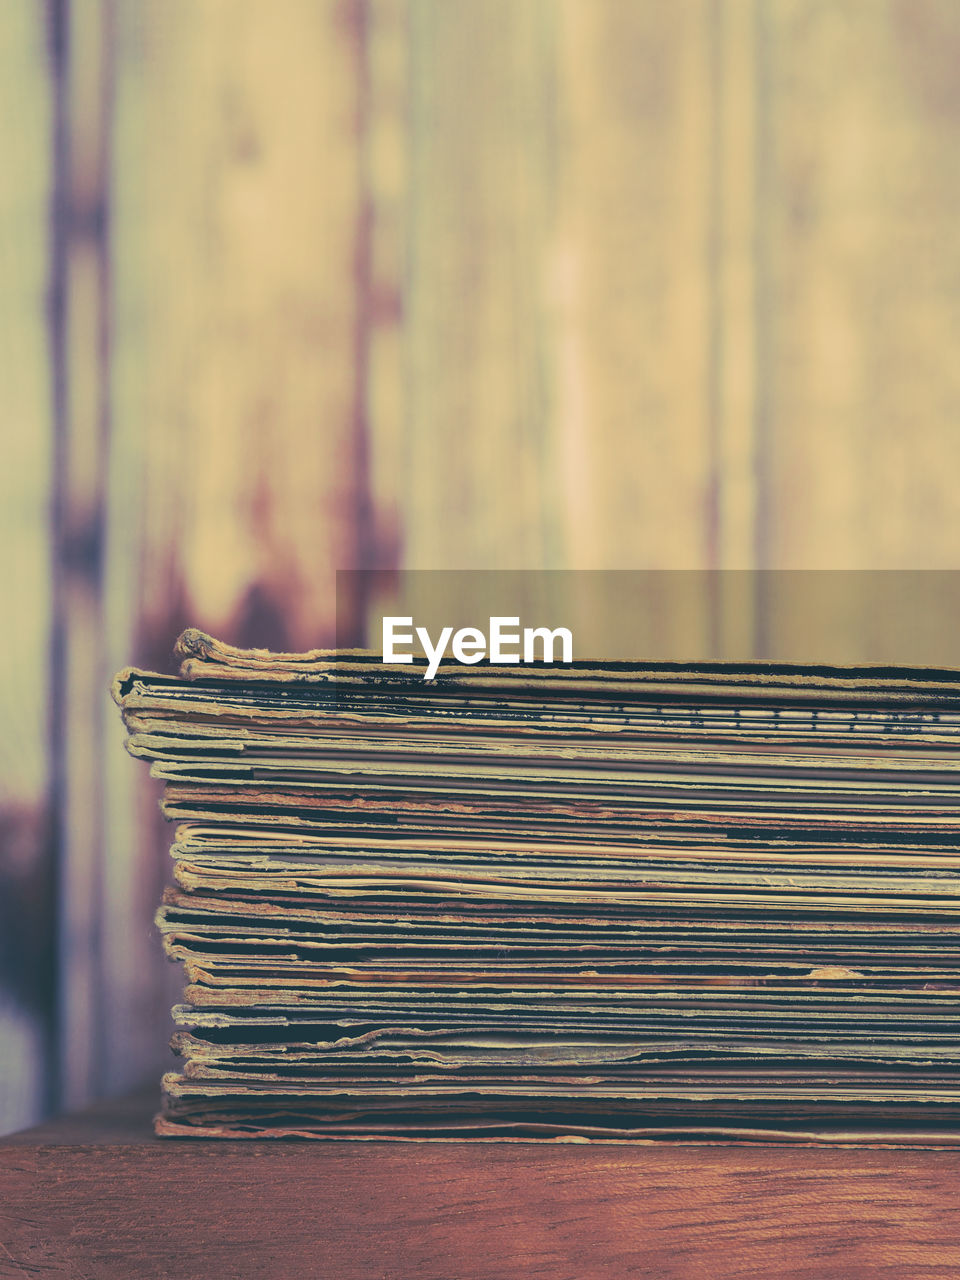 Lp vinyl records stacked close up with textured wood background copy space